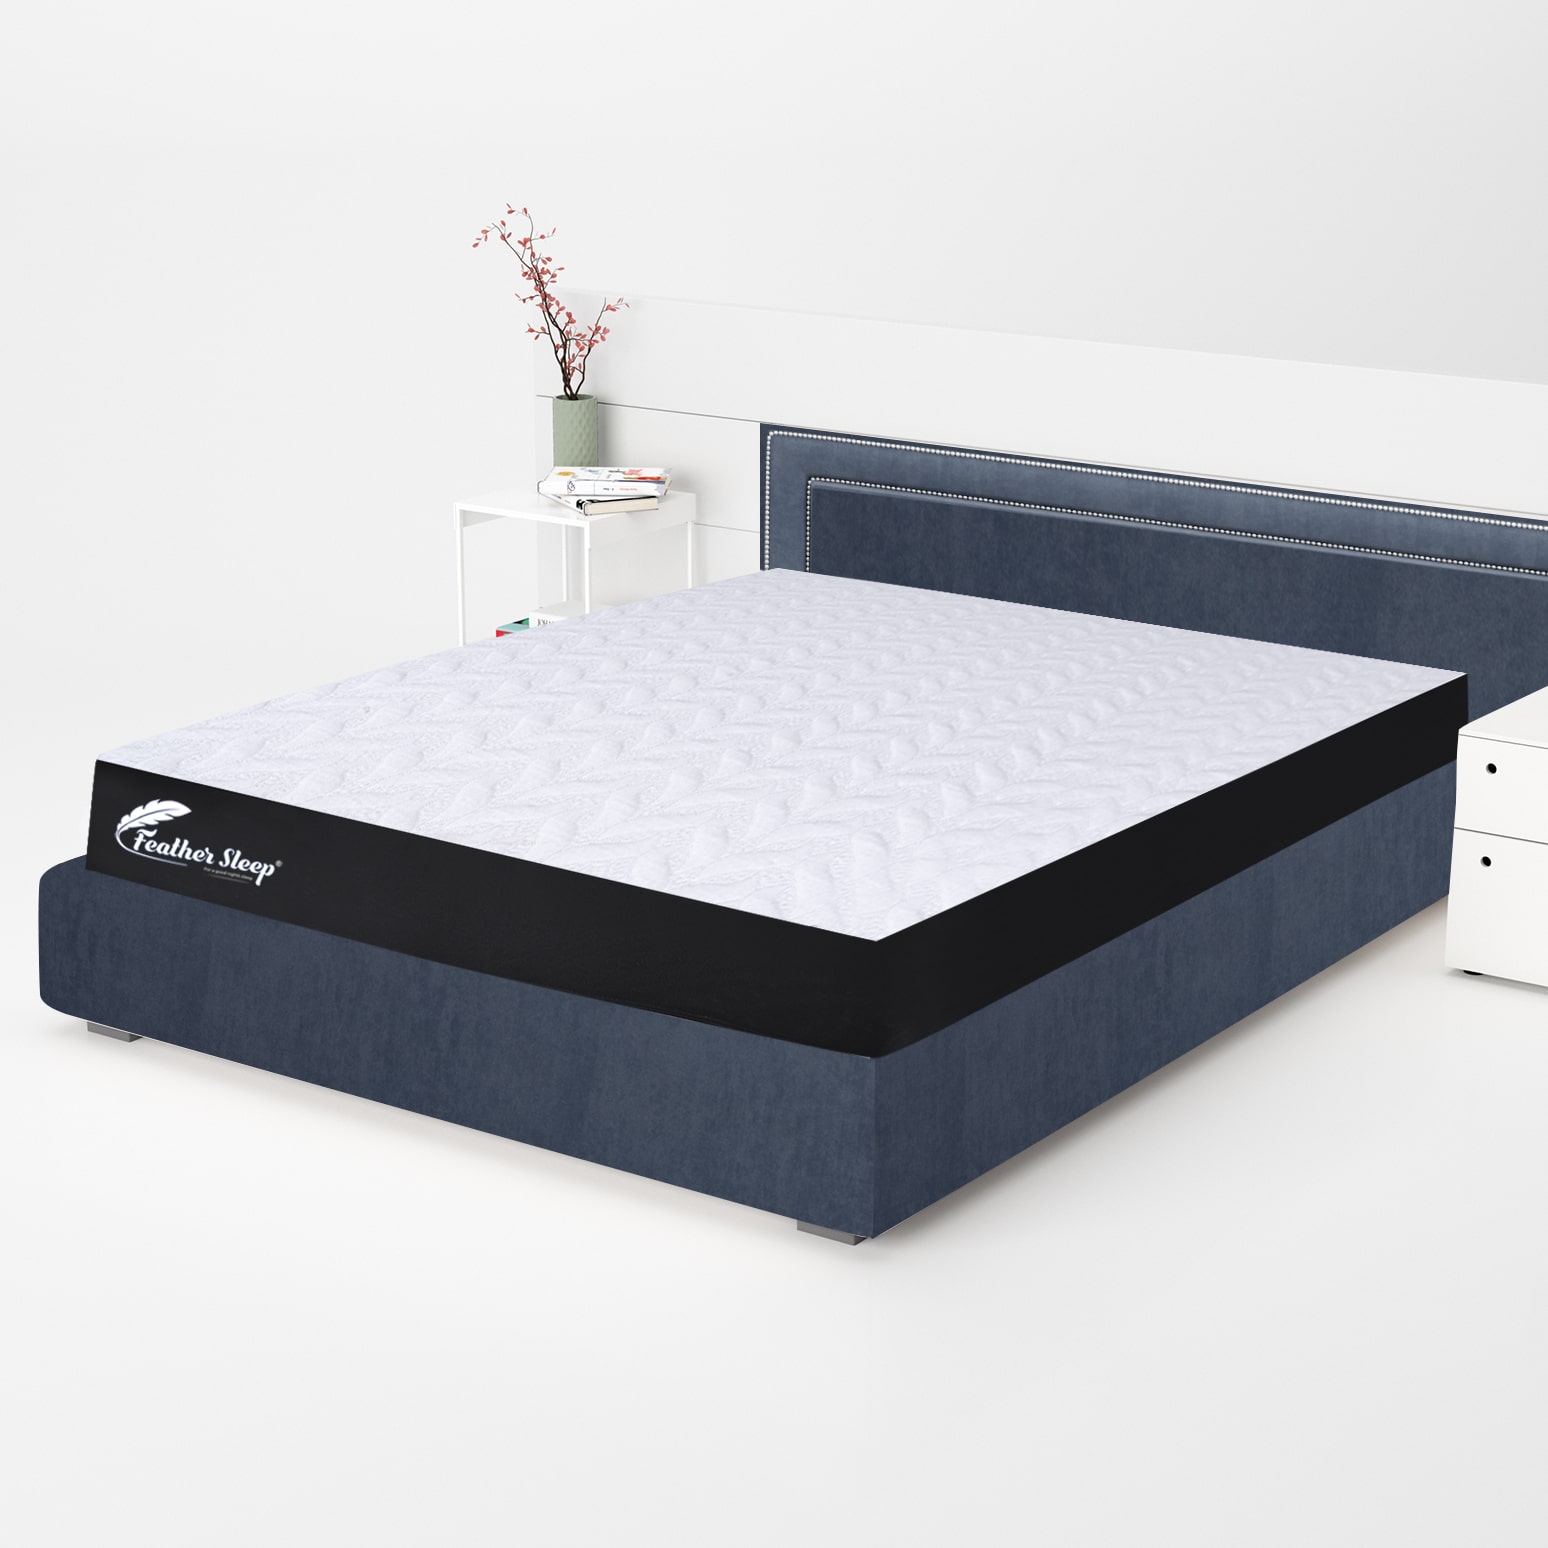 First ChoiceFeather Sleep Dual Comfort 5 Inch Hybrid Ortho Mattress with Cool Gel Foam Luxury Bed Mattress